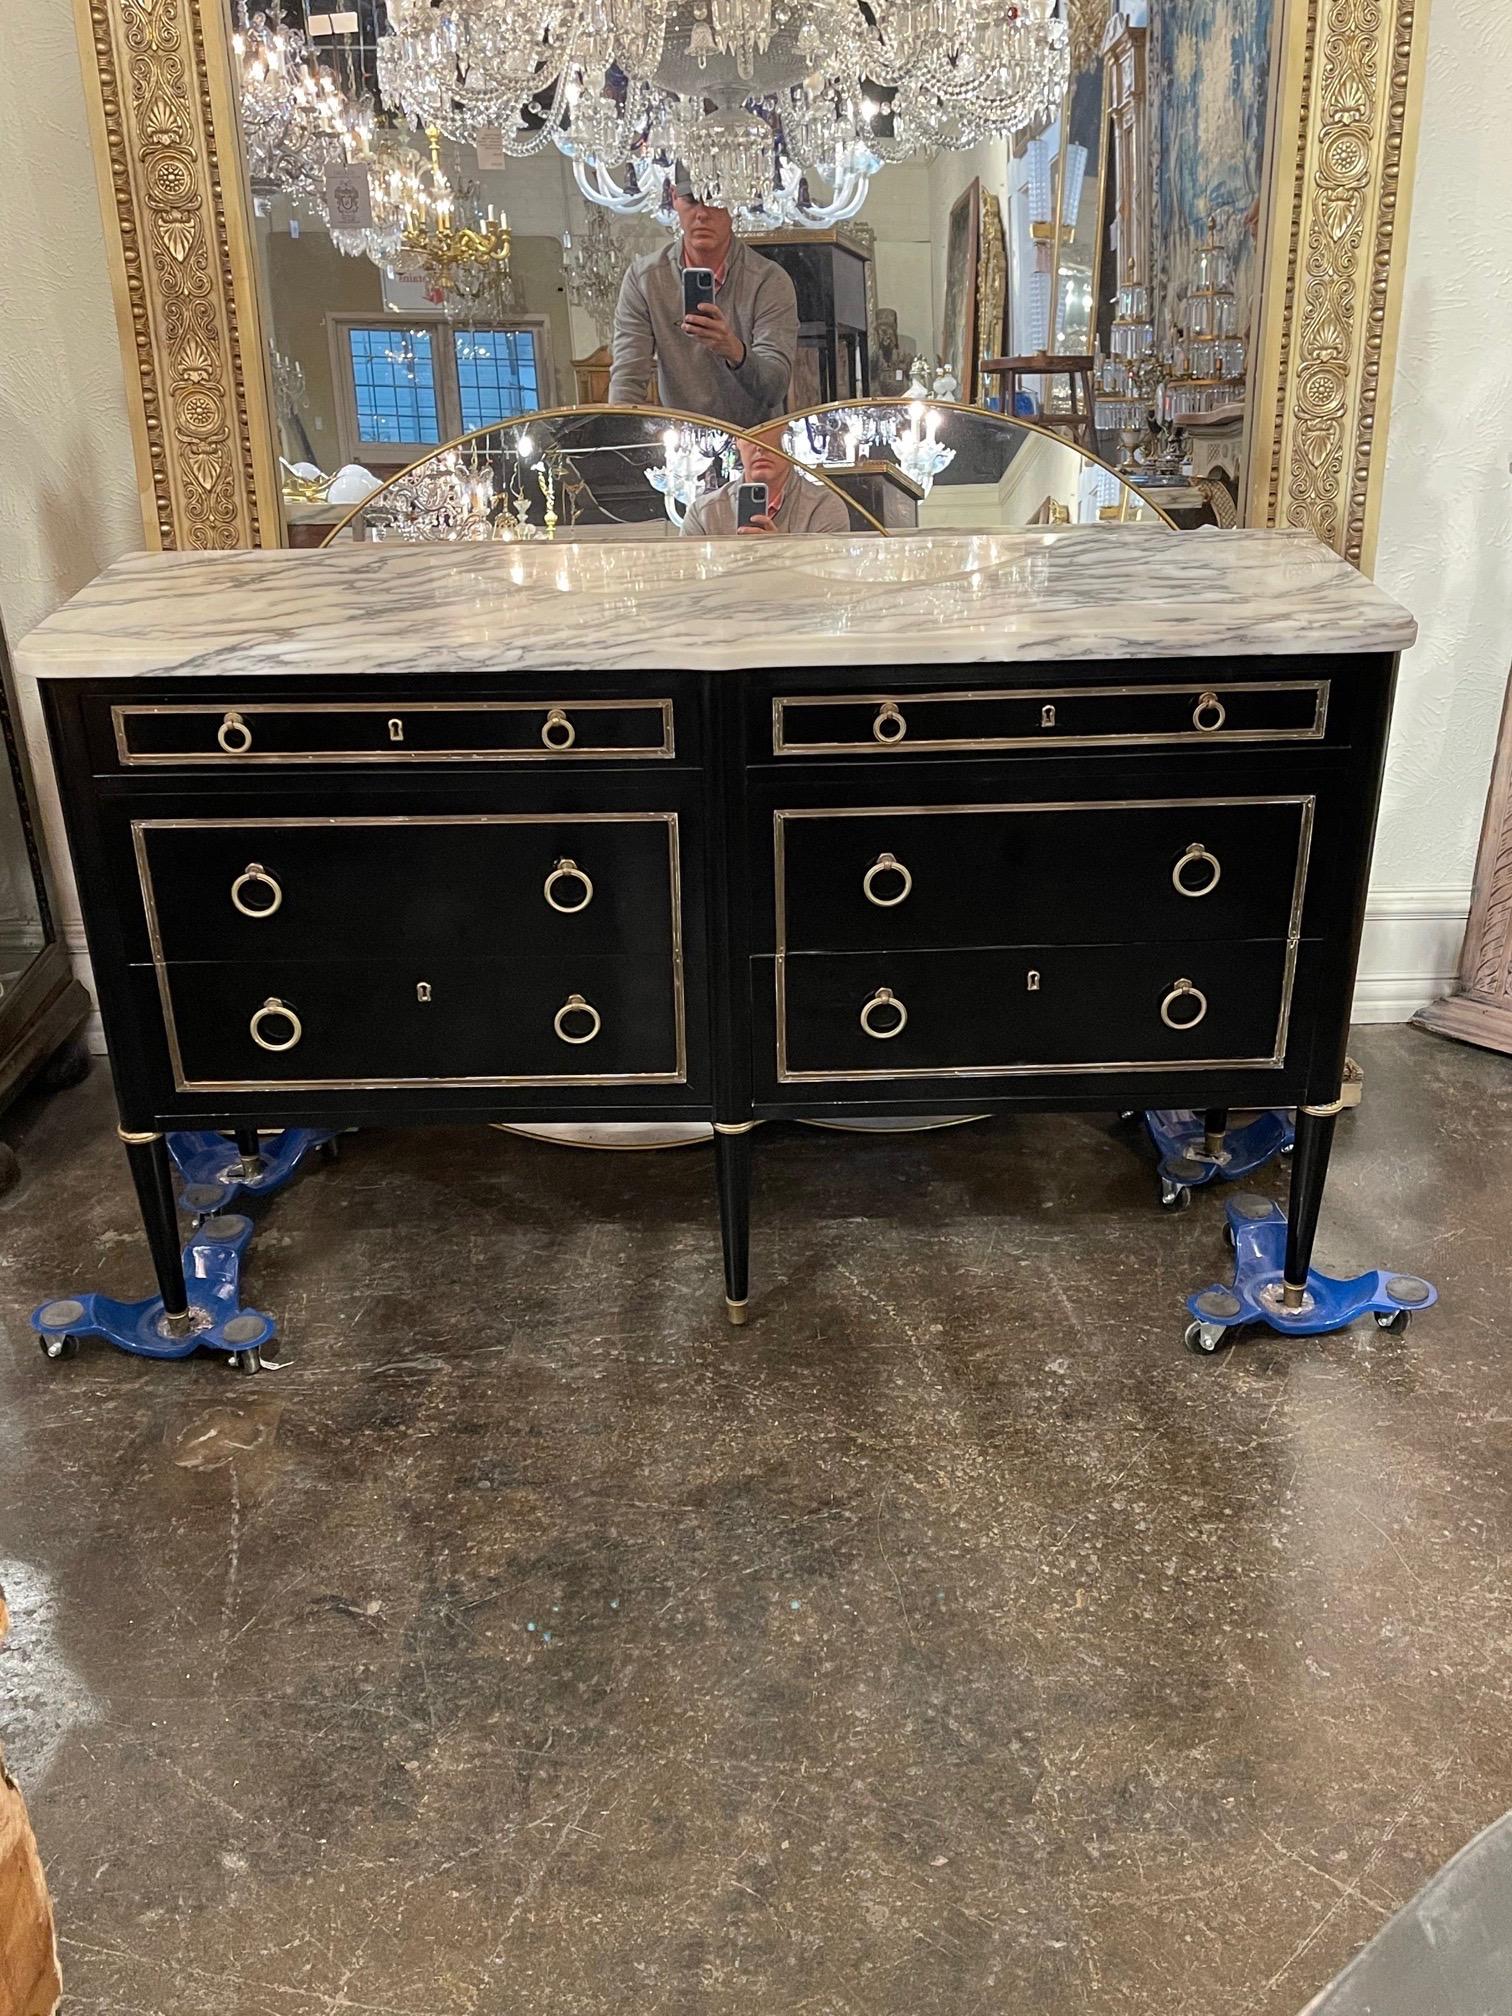 Lovely French Jansen style black lacquered dresser with marble top. Featuring a beautiful polished finish and pretty brass hardware. Fabulous!